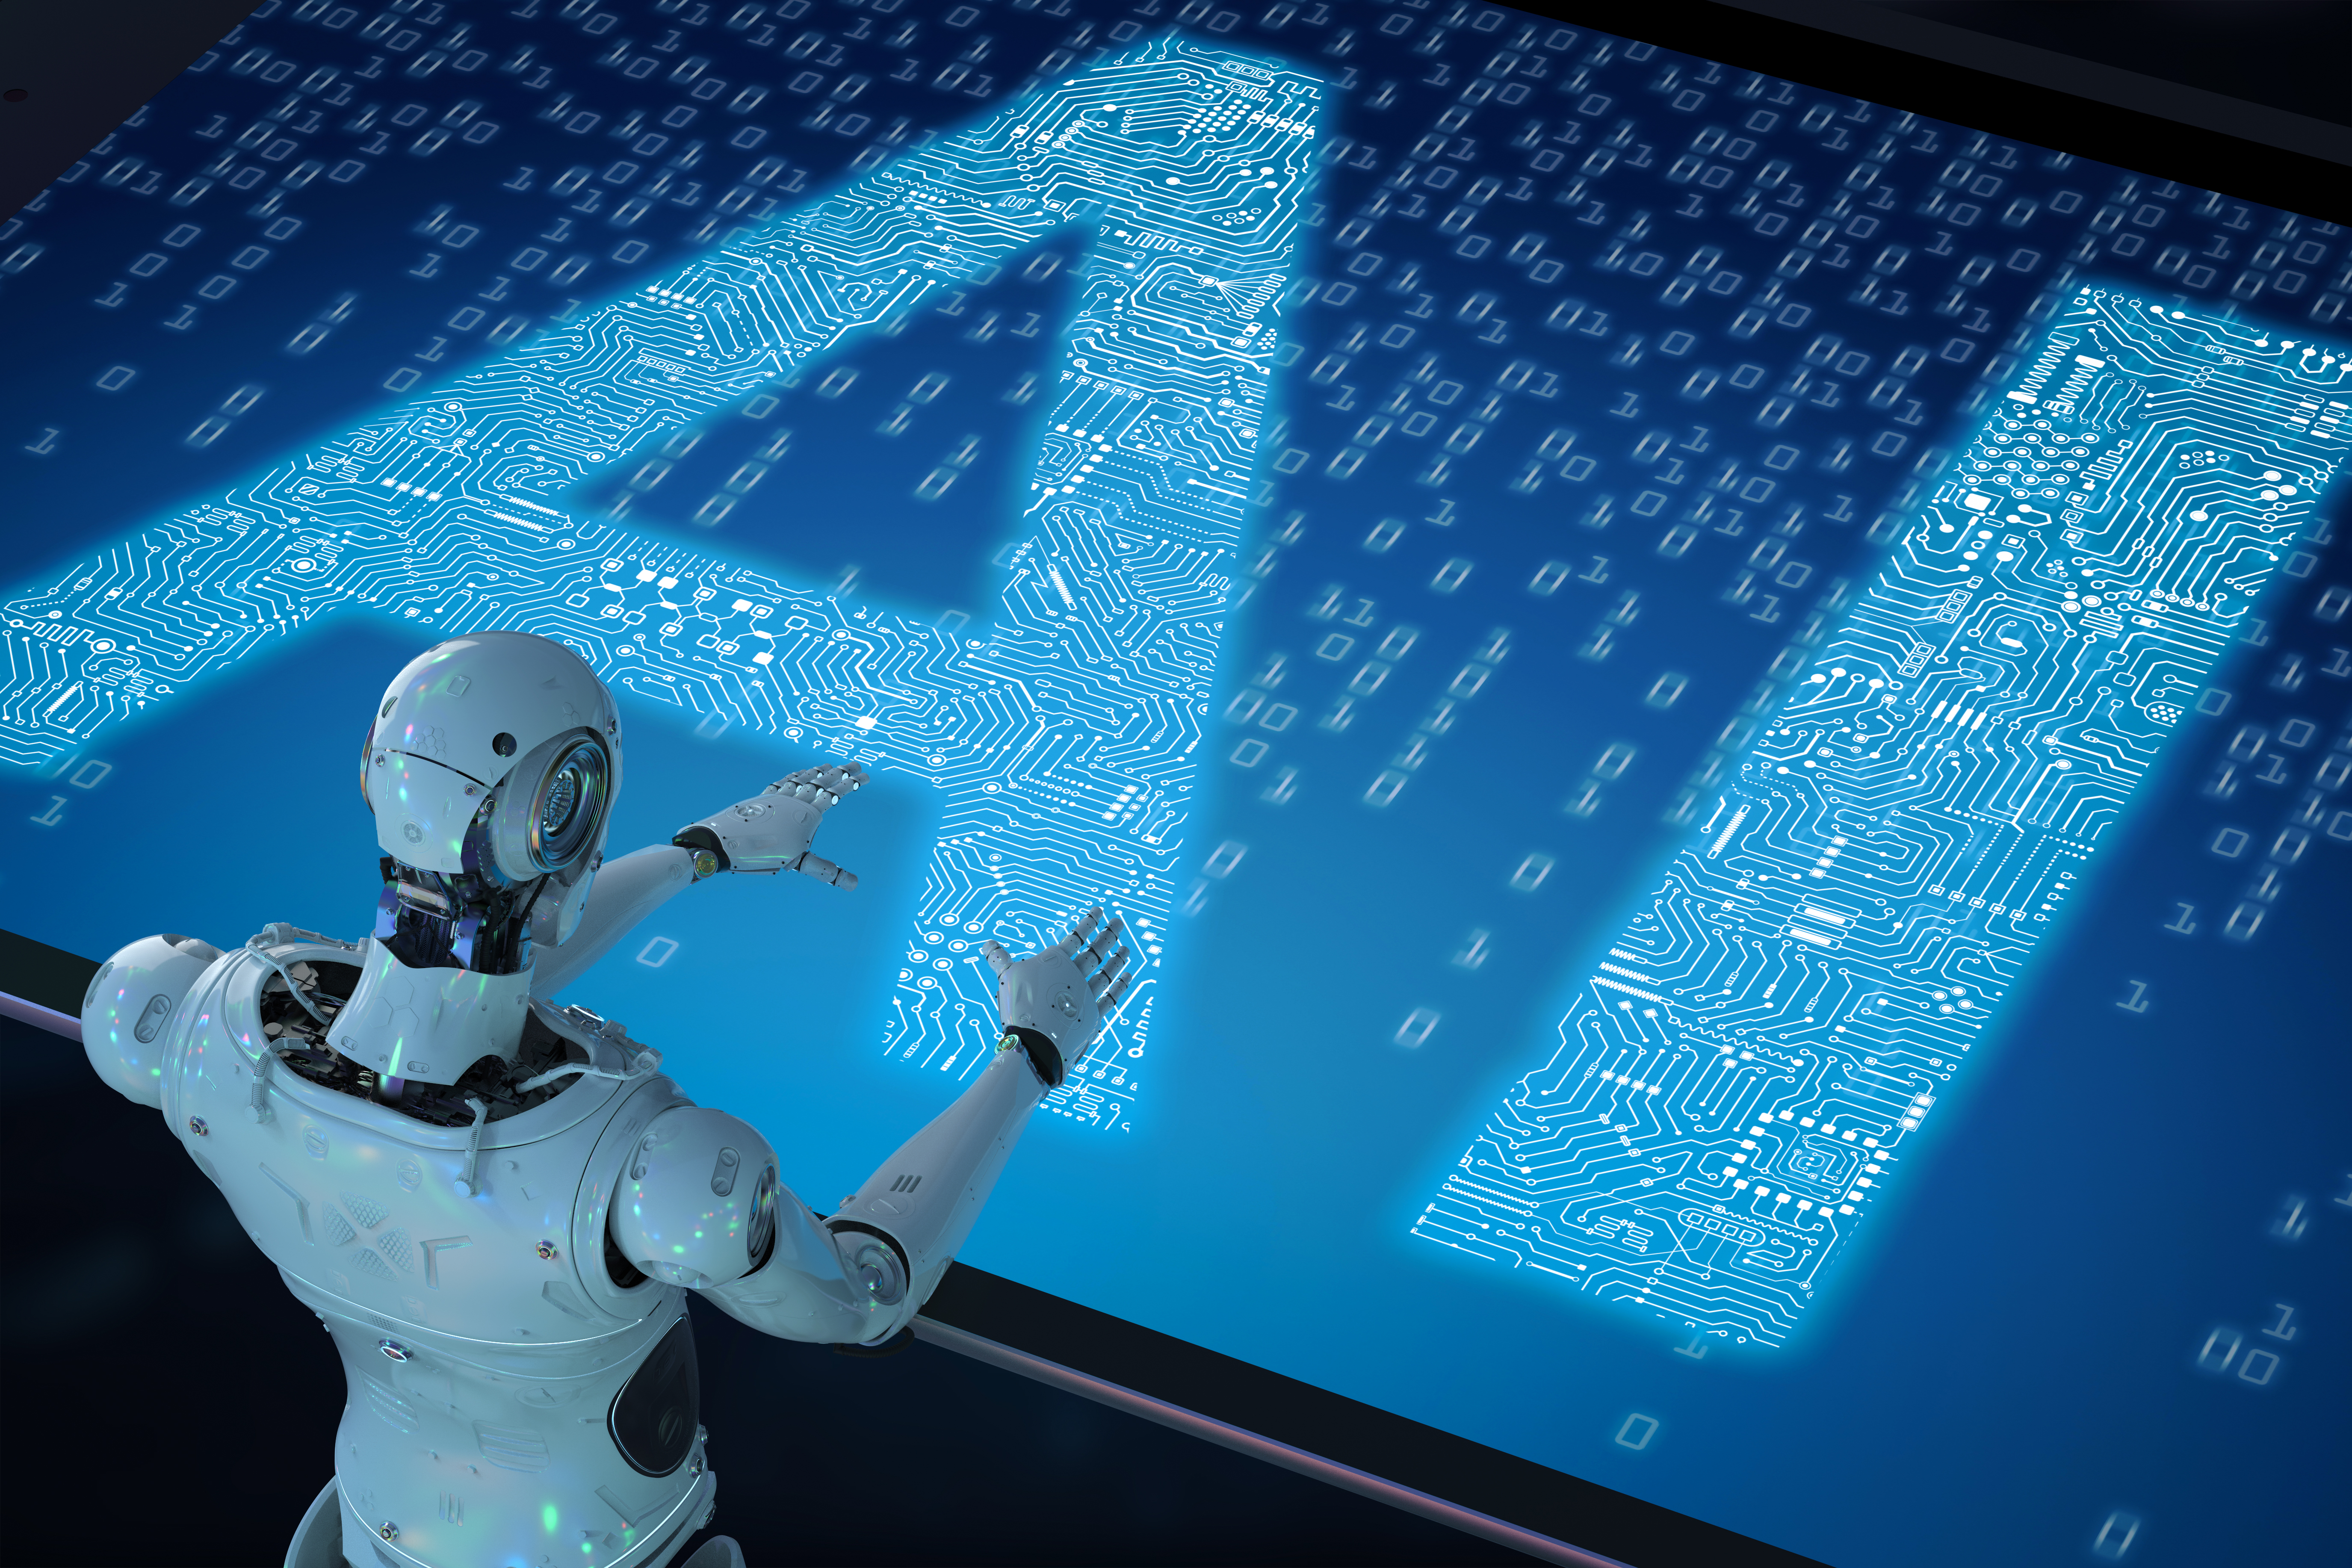 A humanoid robot stands in front of a screen displaying the letters “AI.”